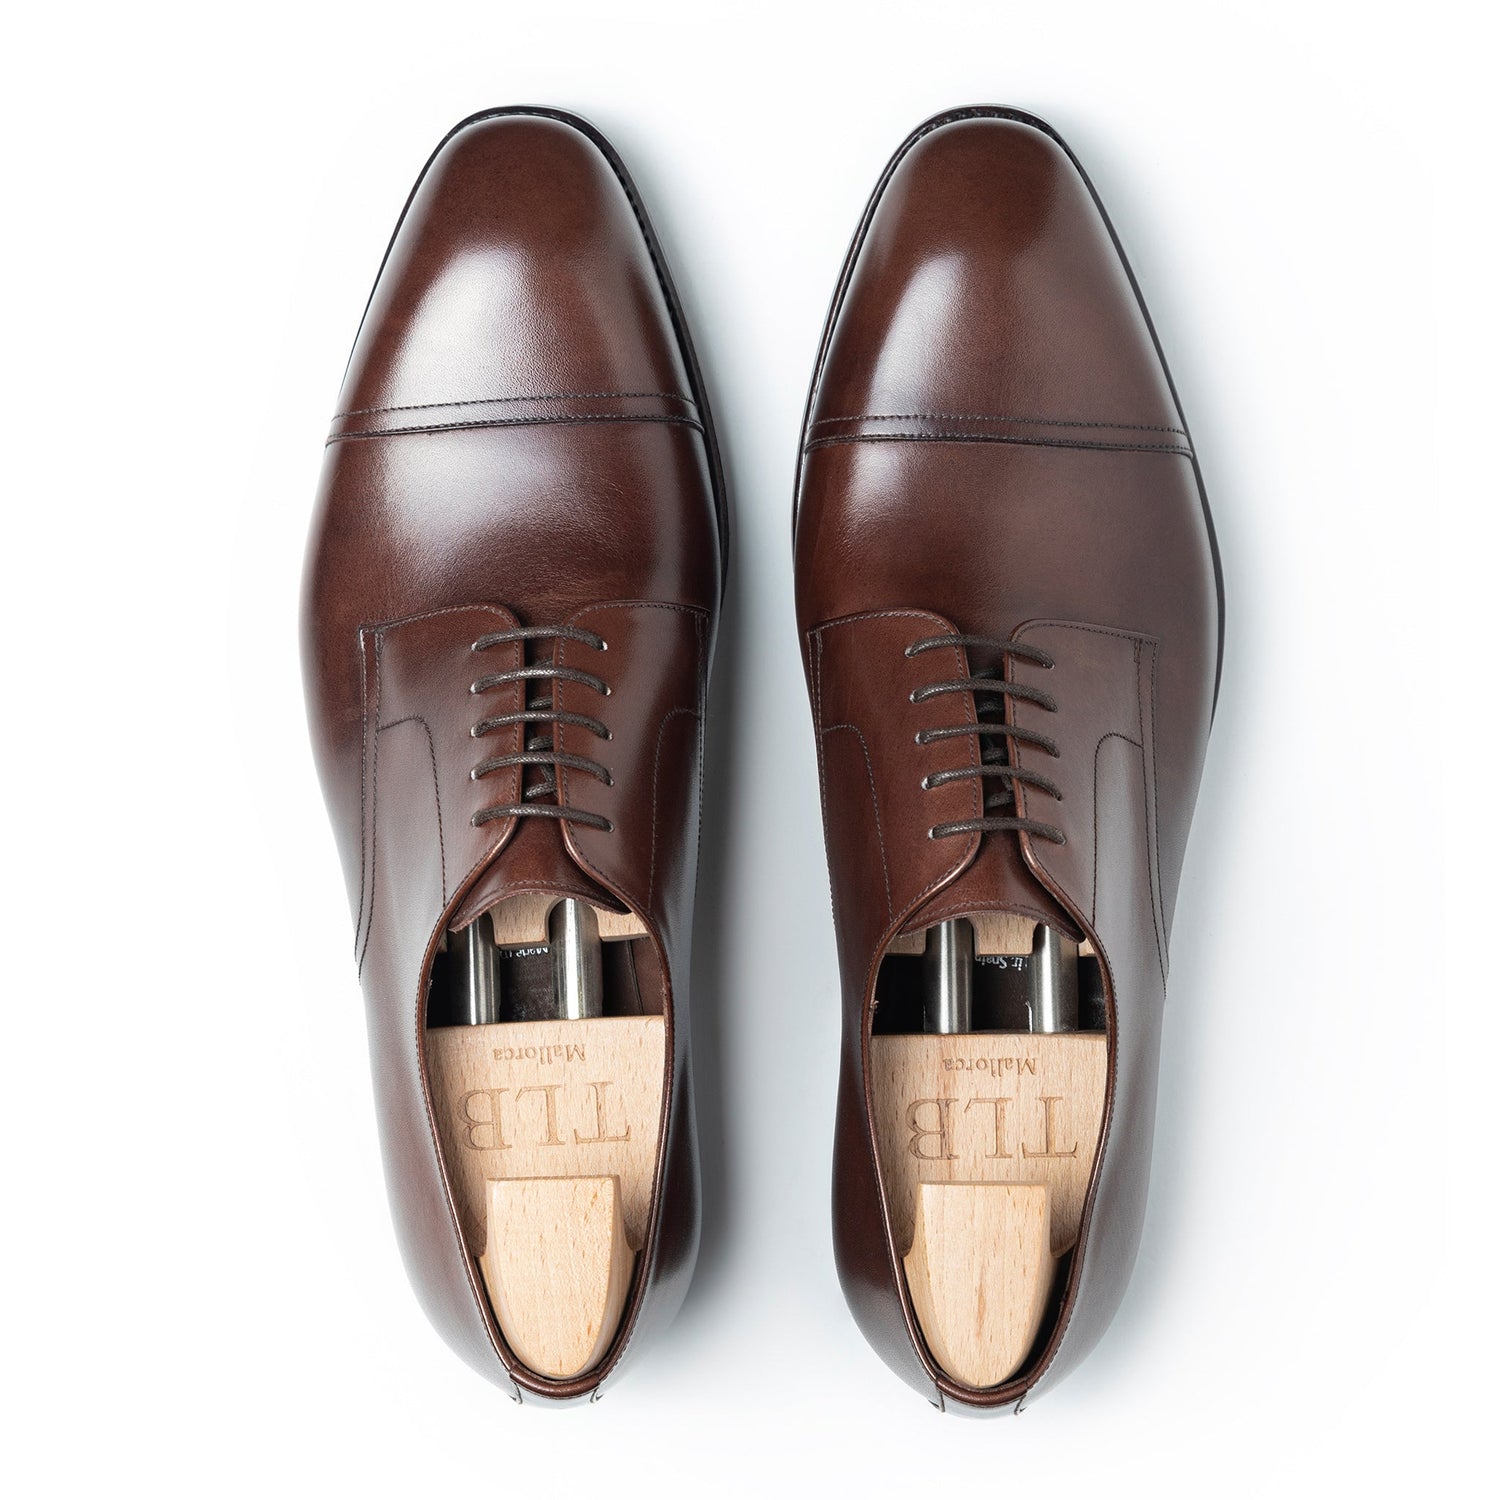 TLB Mallorca  Leather Men's Derby shoes made in Spain